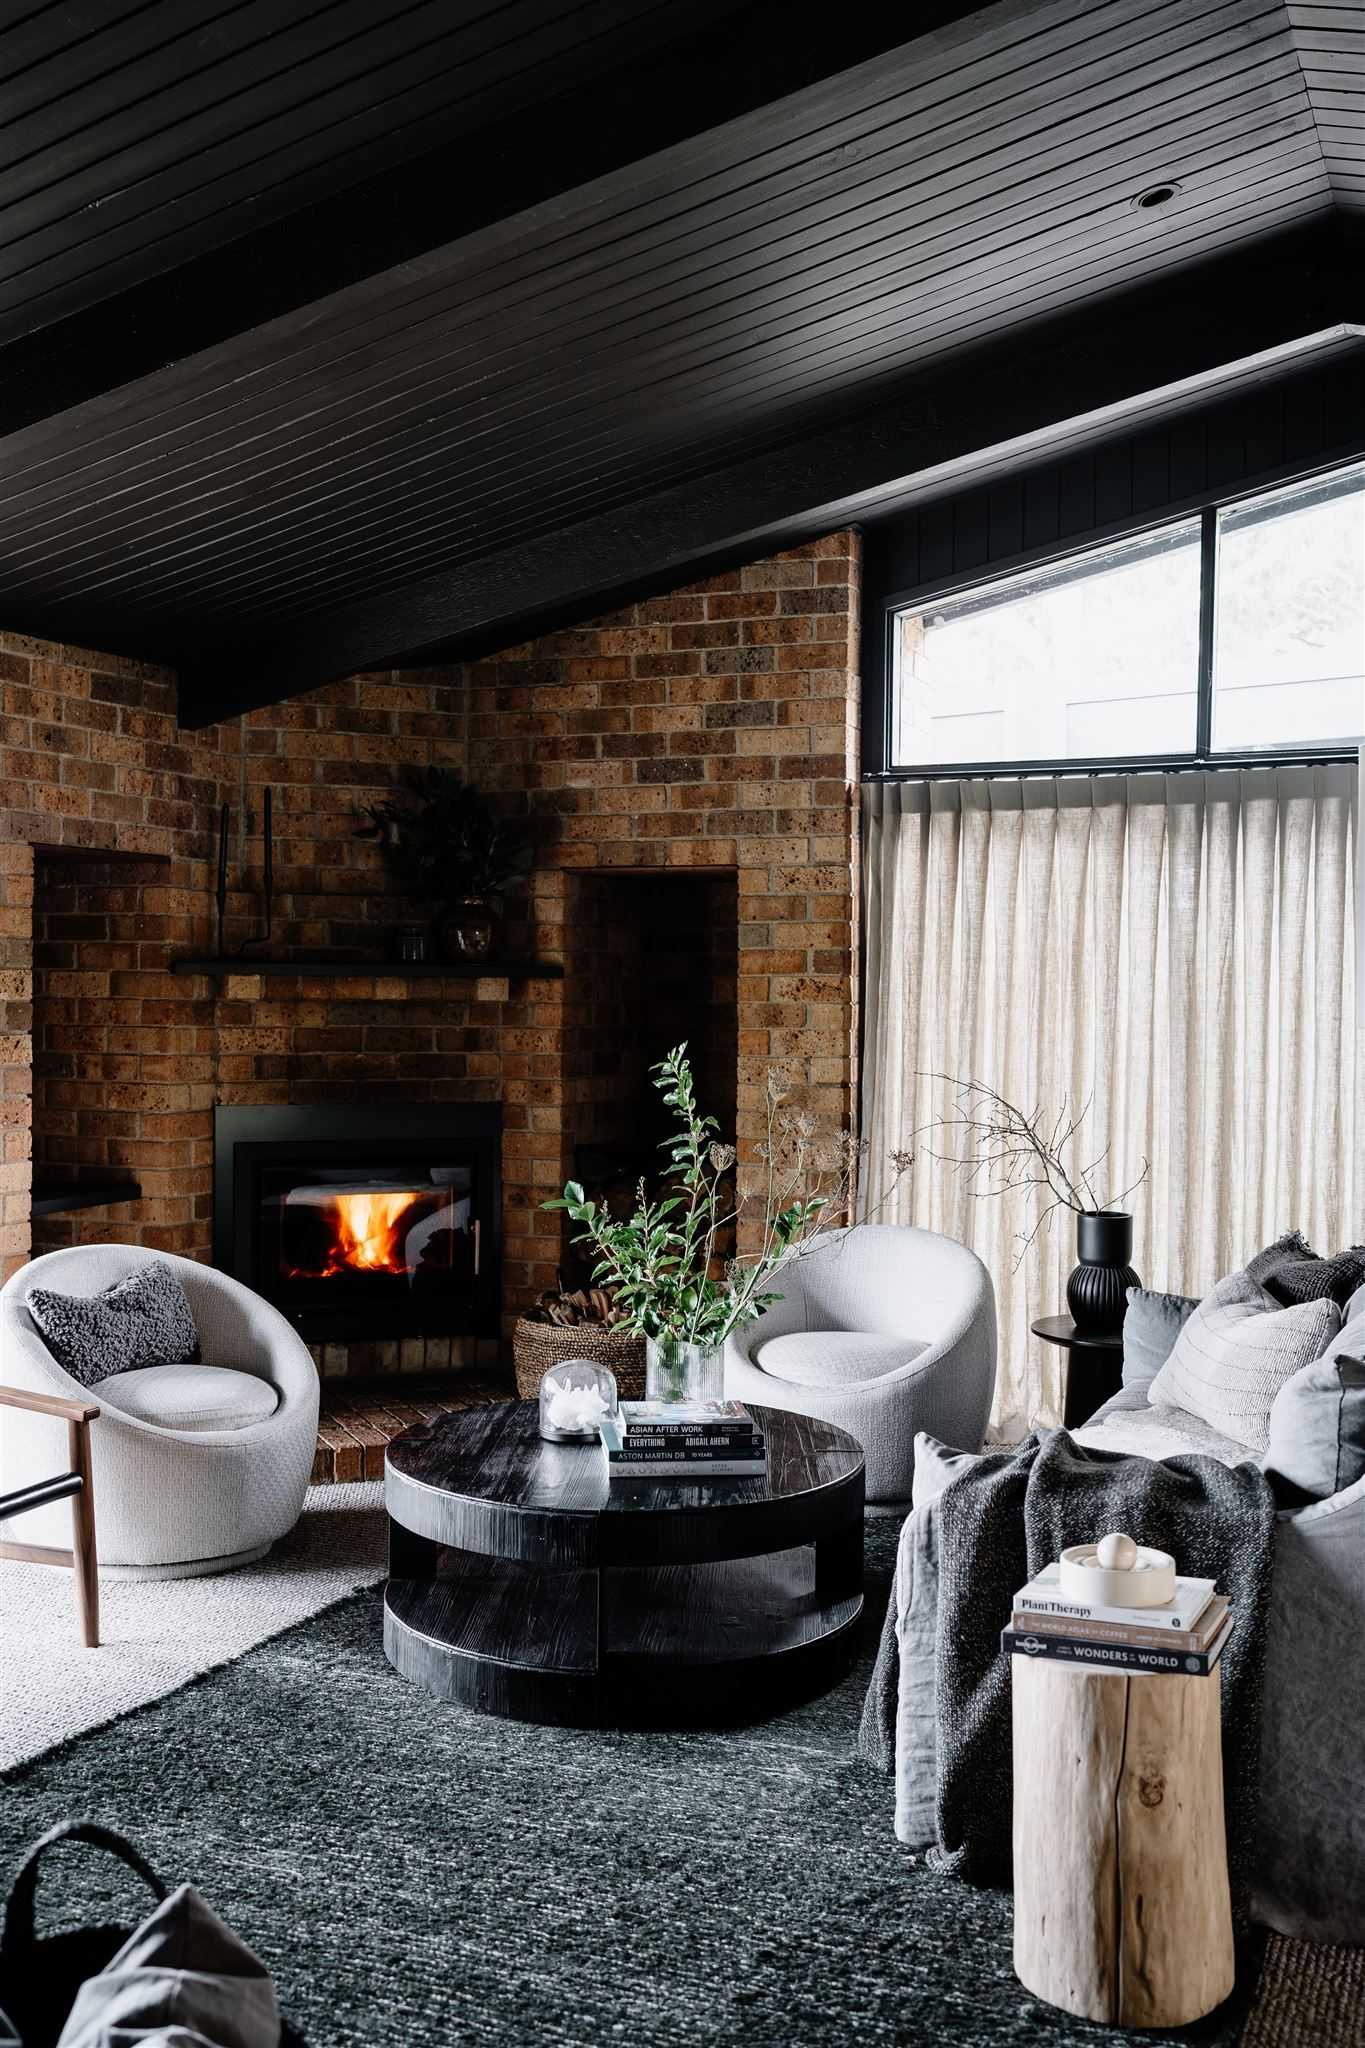 Jumoku Daylesford. Showing the living room of the holiday home with a face brick wall and fireplace